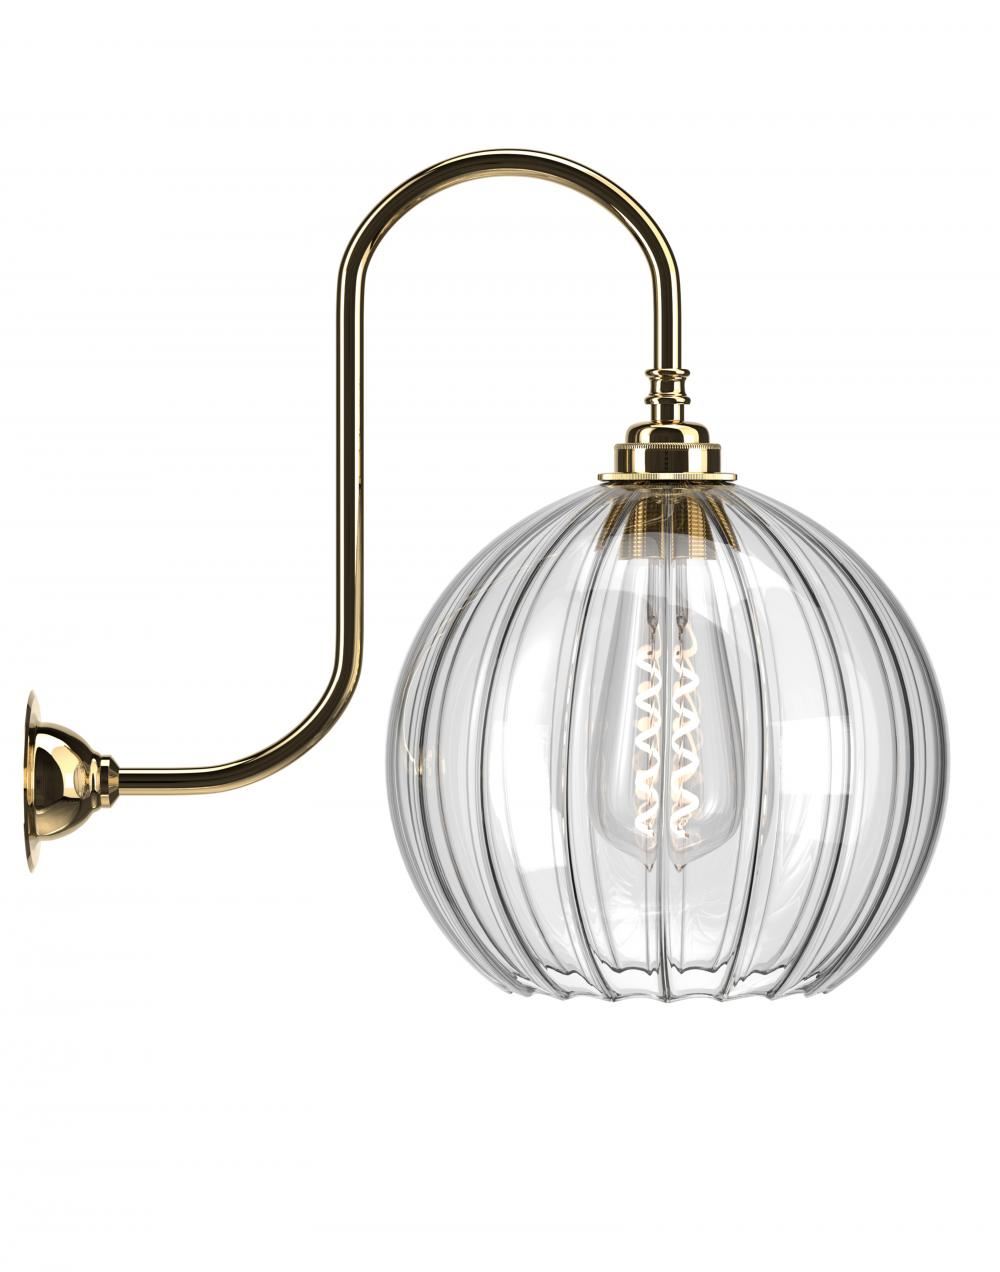 Hereford Swan Neck Wall Light Large Ribbed Polished Brass